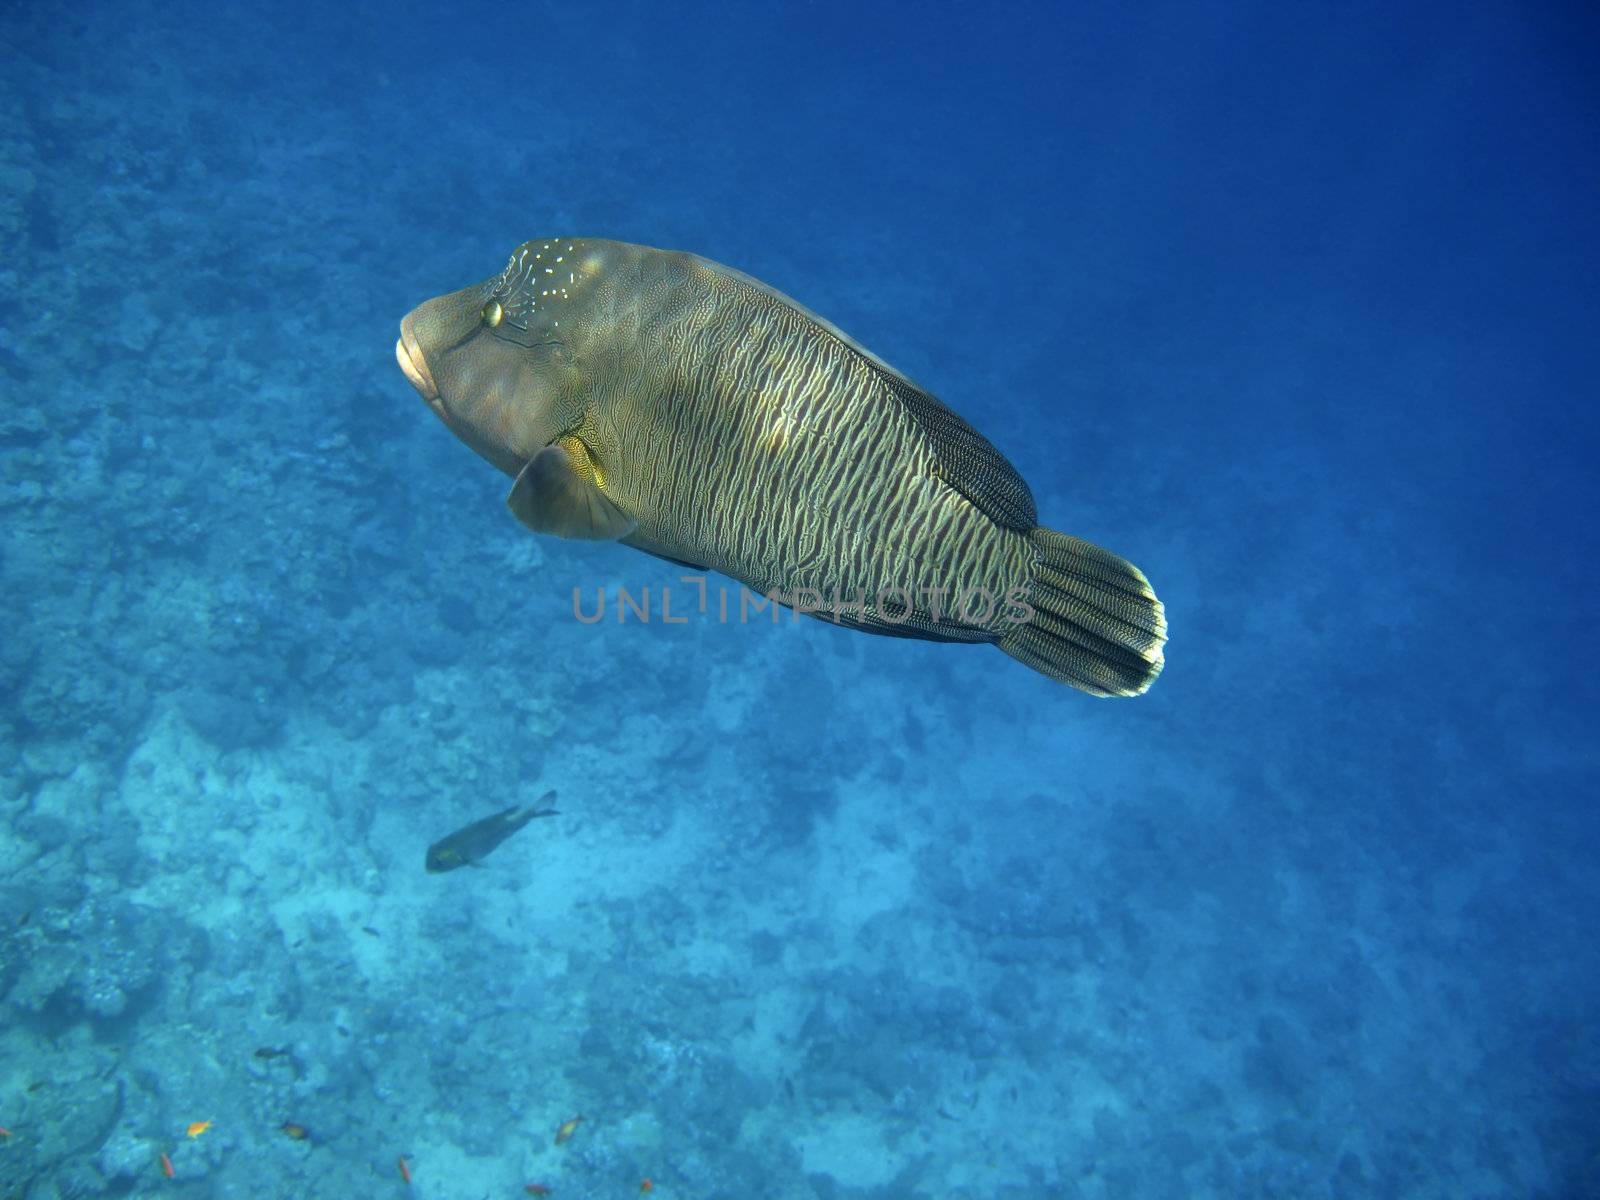 Napoleon wrasse and coral reef by vintrom